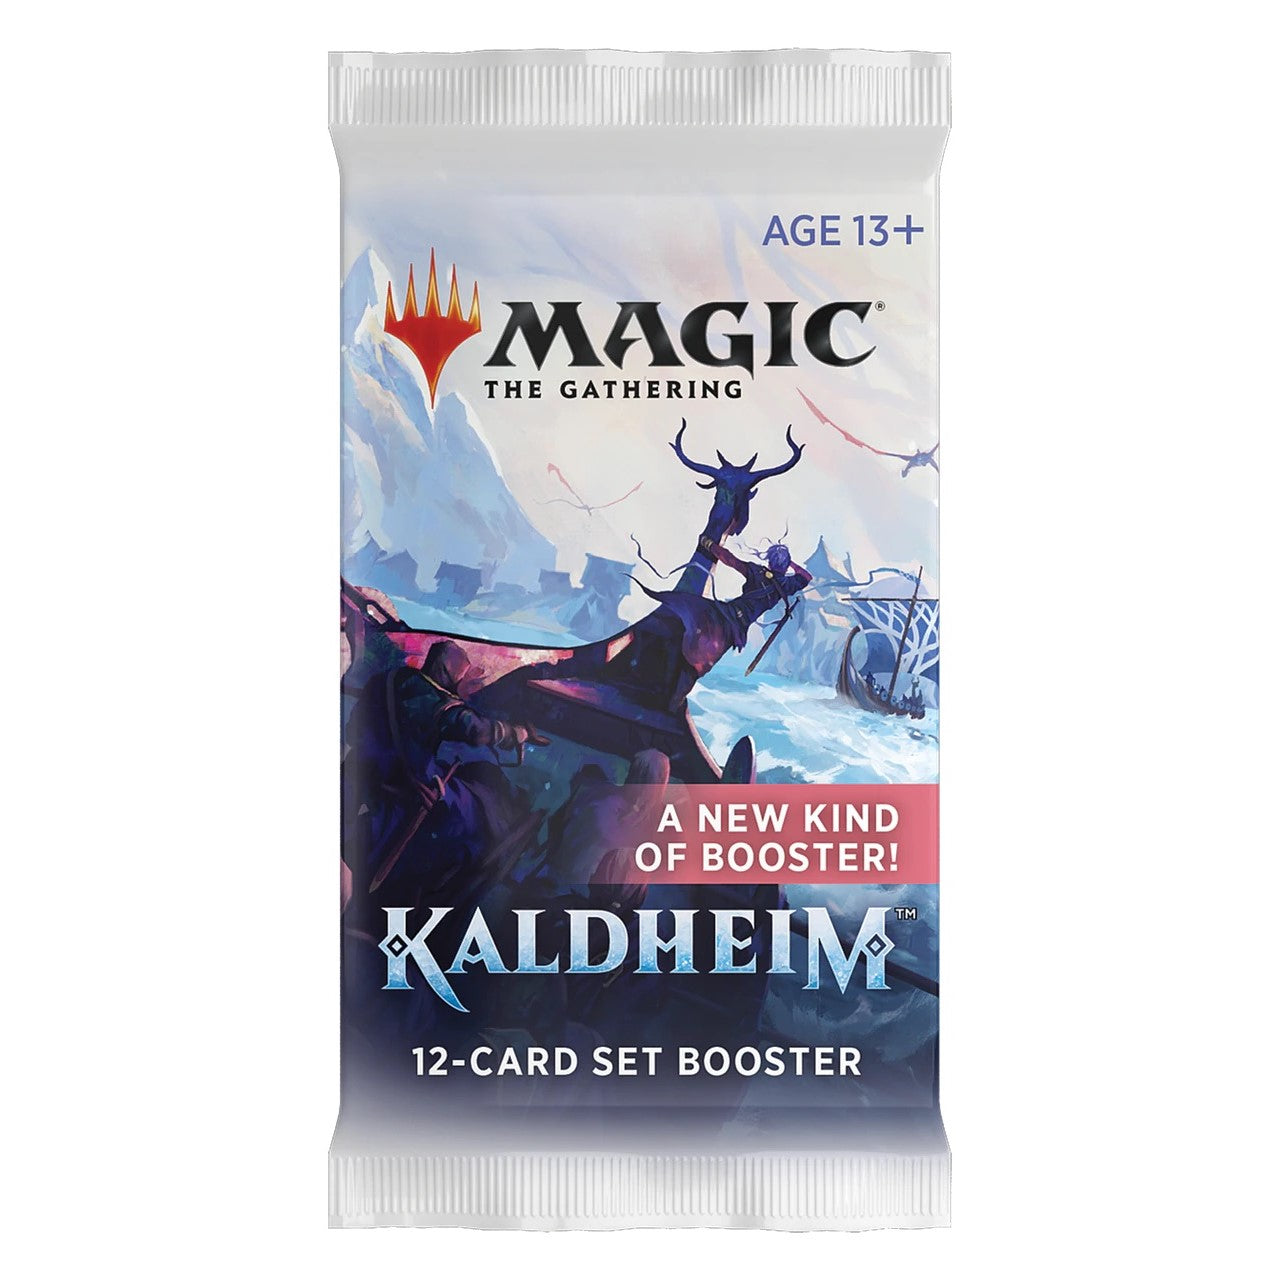 Kaldheim Booster Product